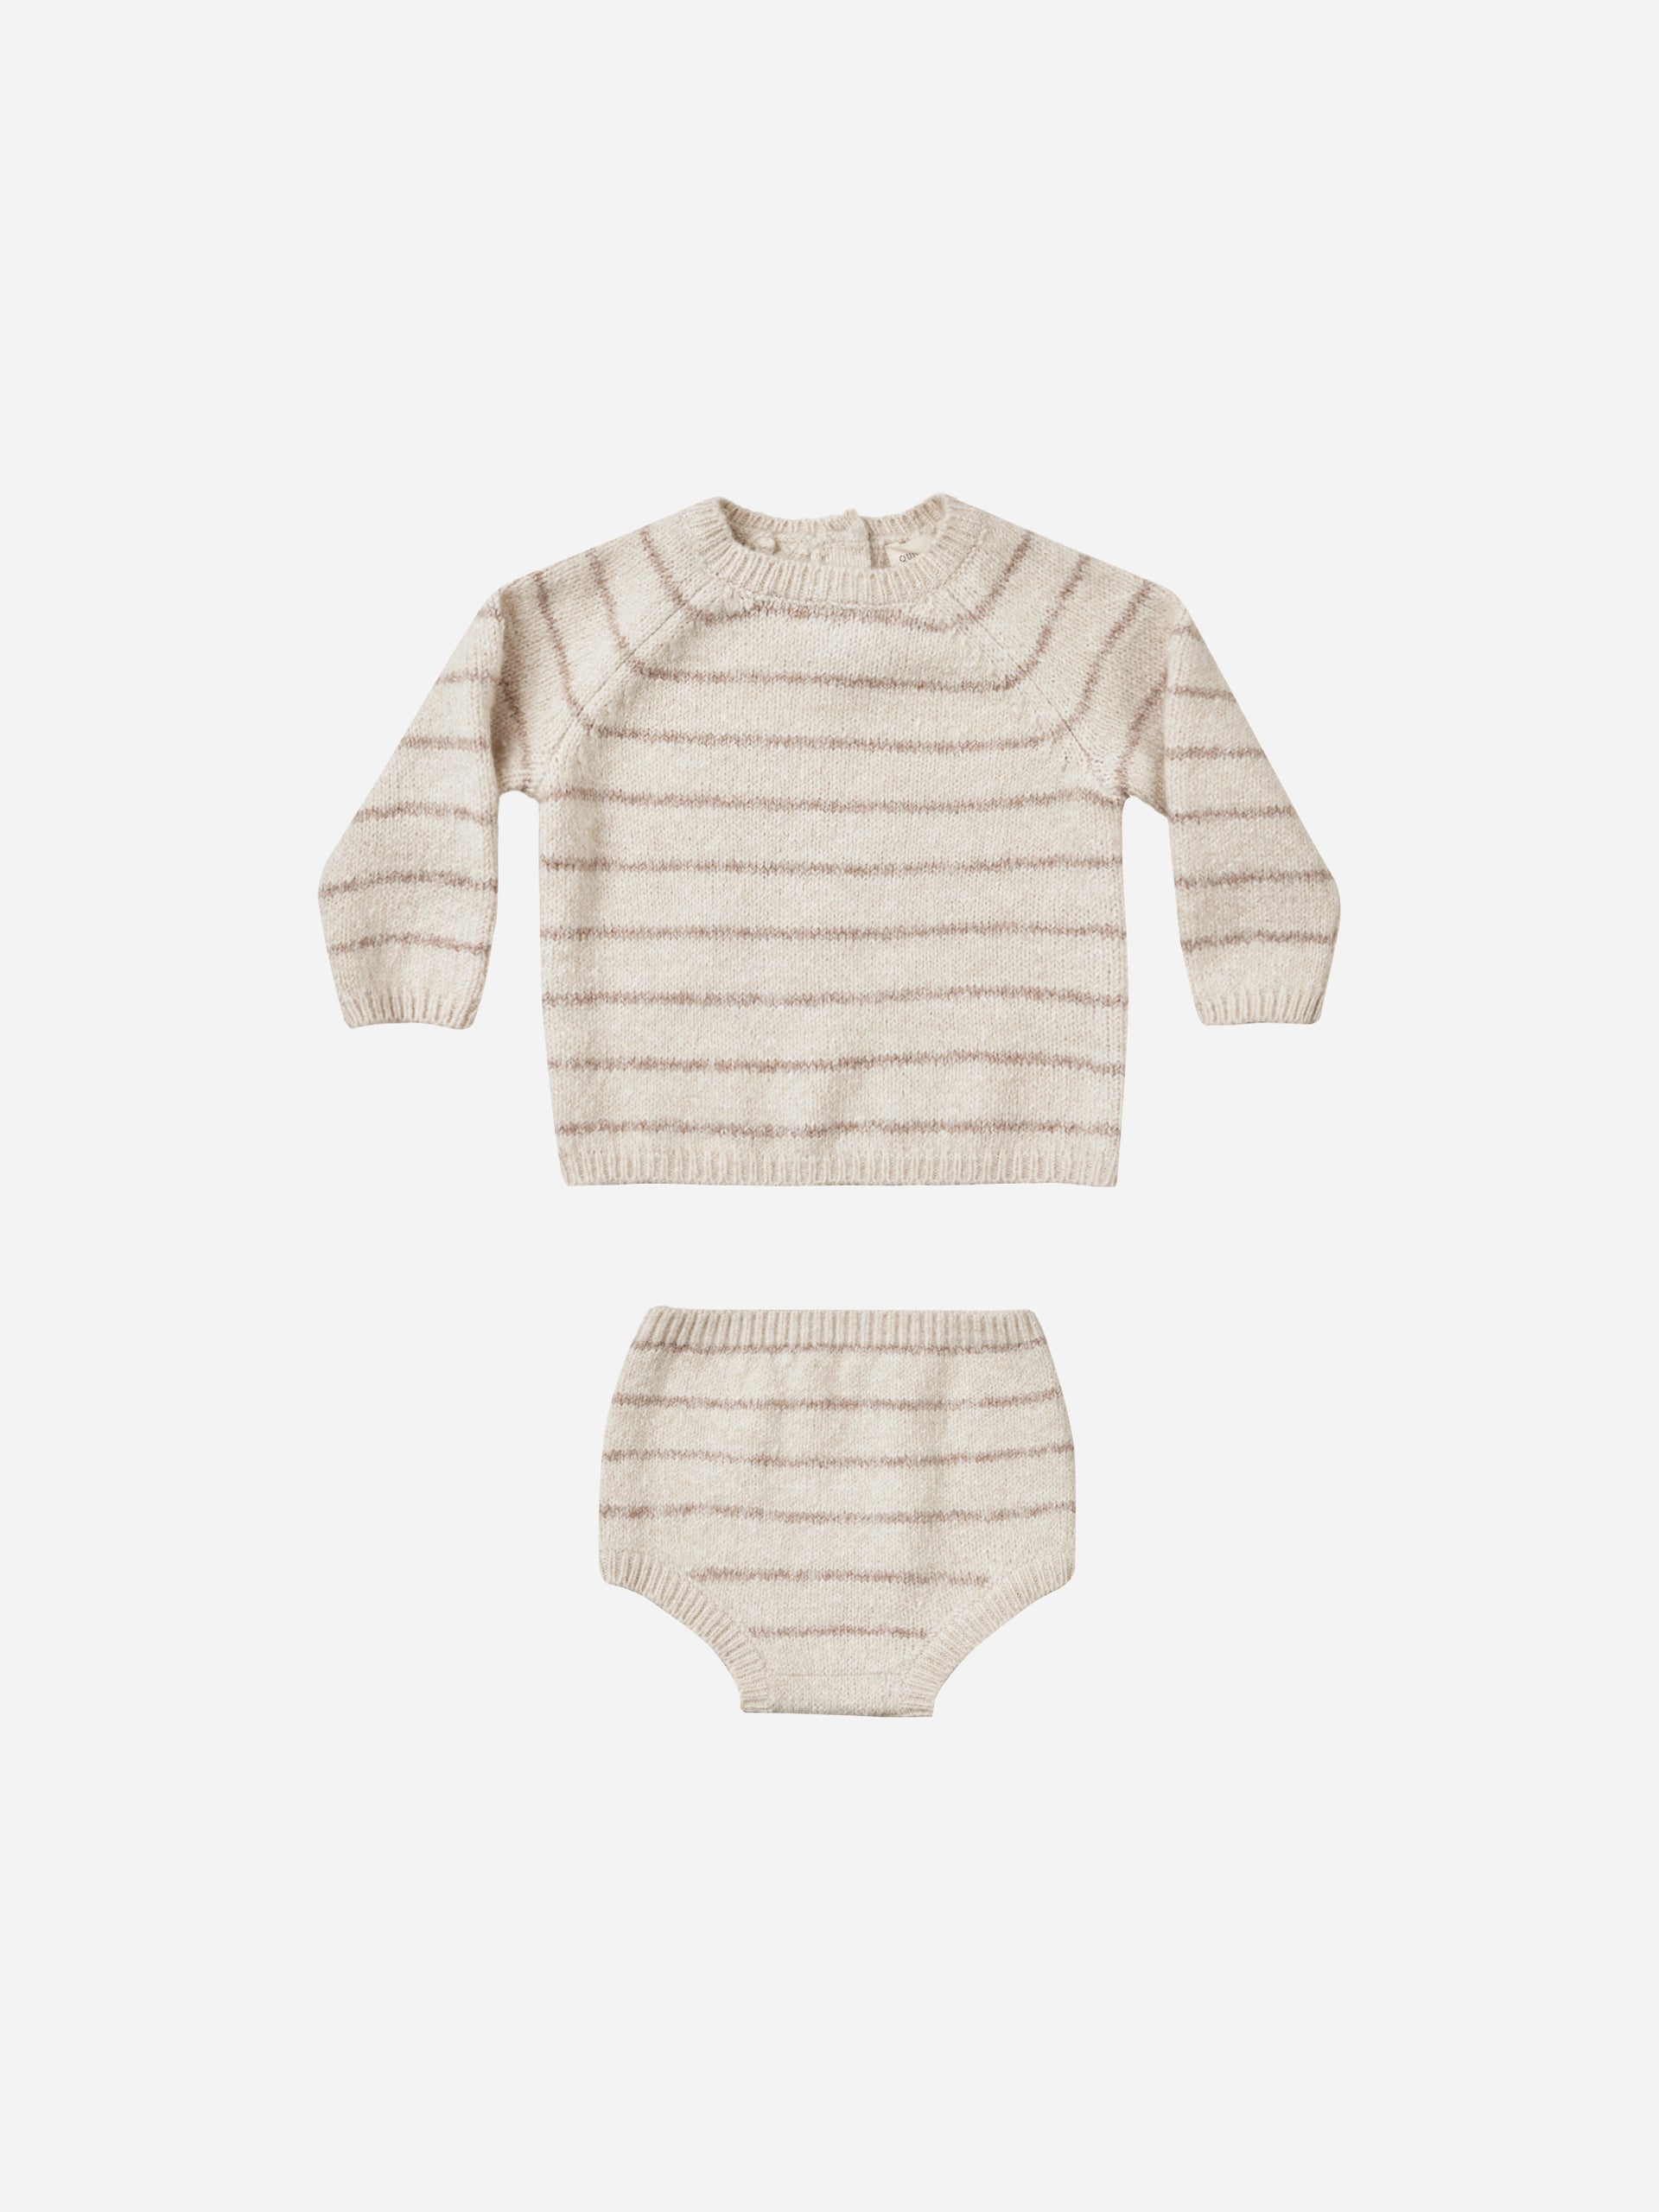 Bailey Knit Set || Heathered Oat Stripe - Rylee + Cru | Kids Clothes | Trendy Baby Clothes | Modern Infant Outfits |